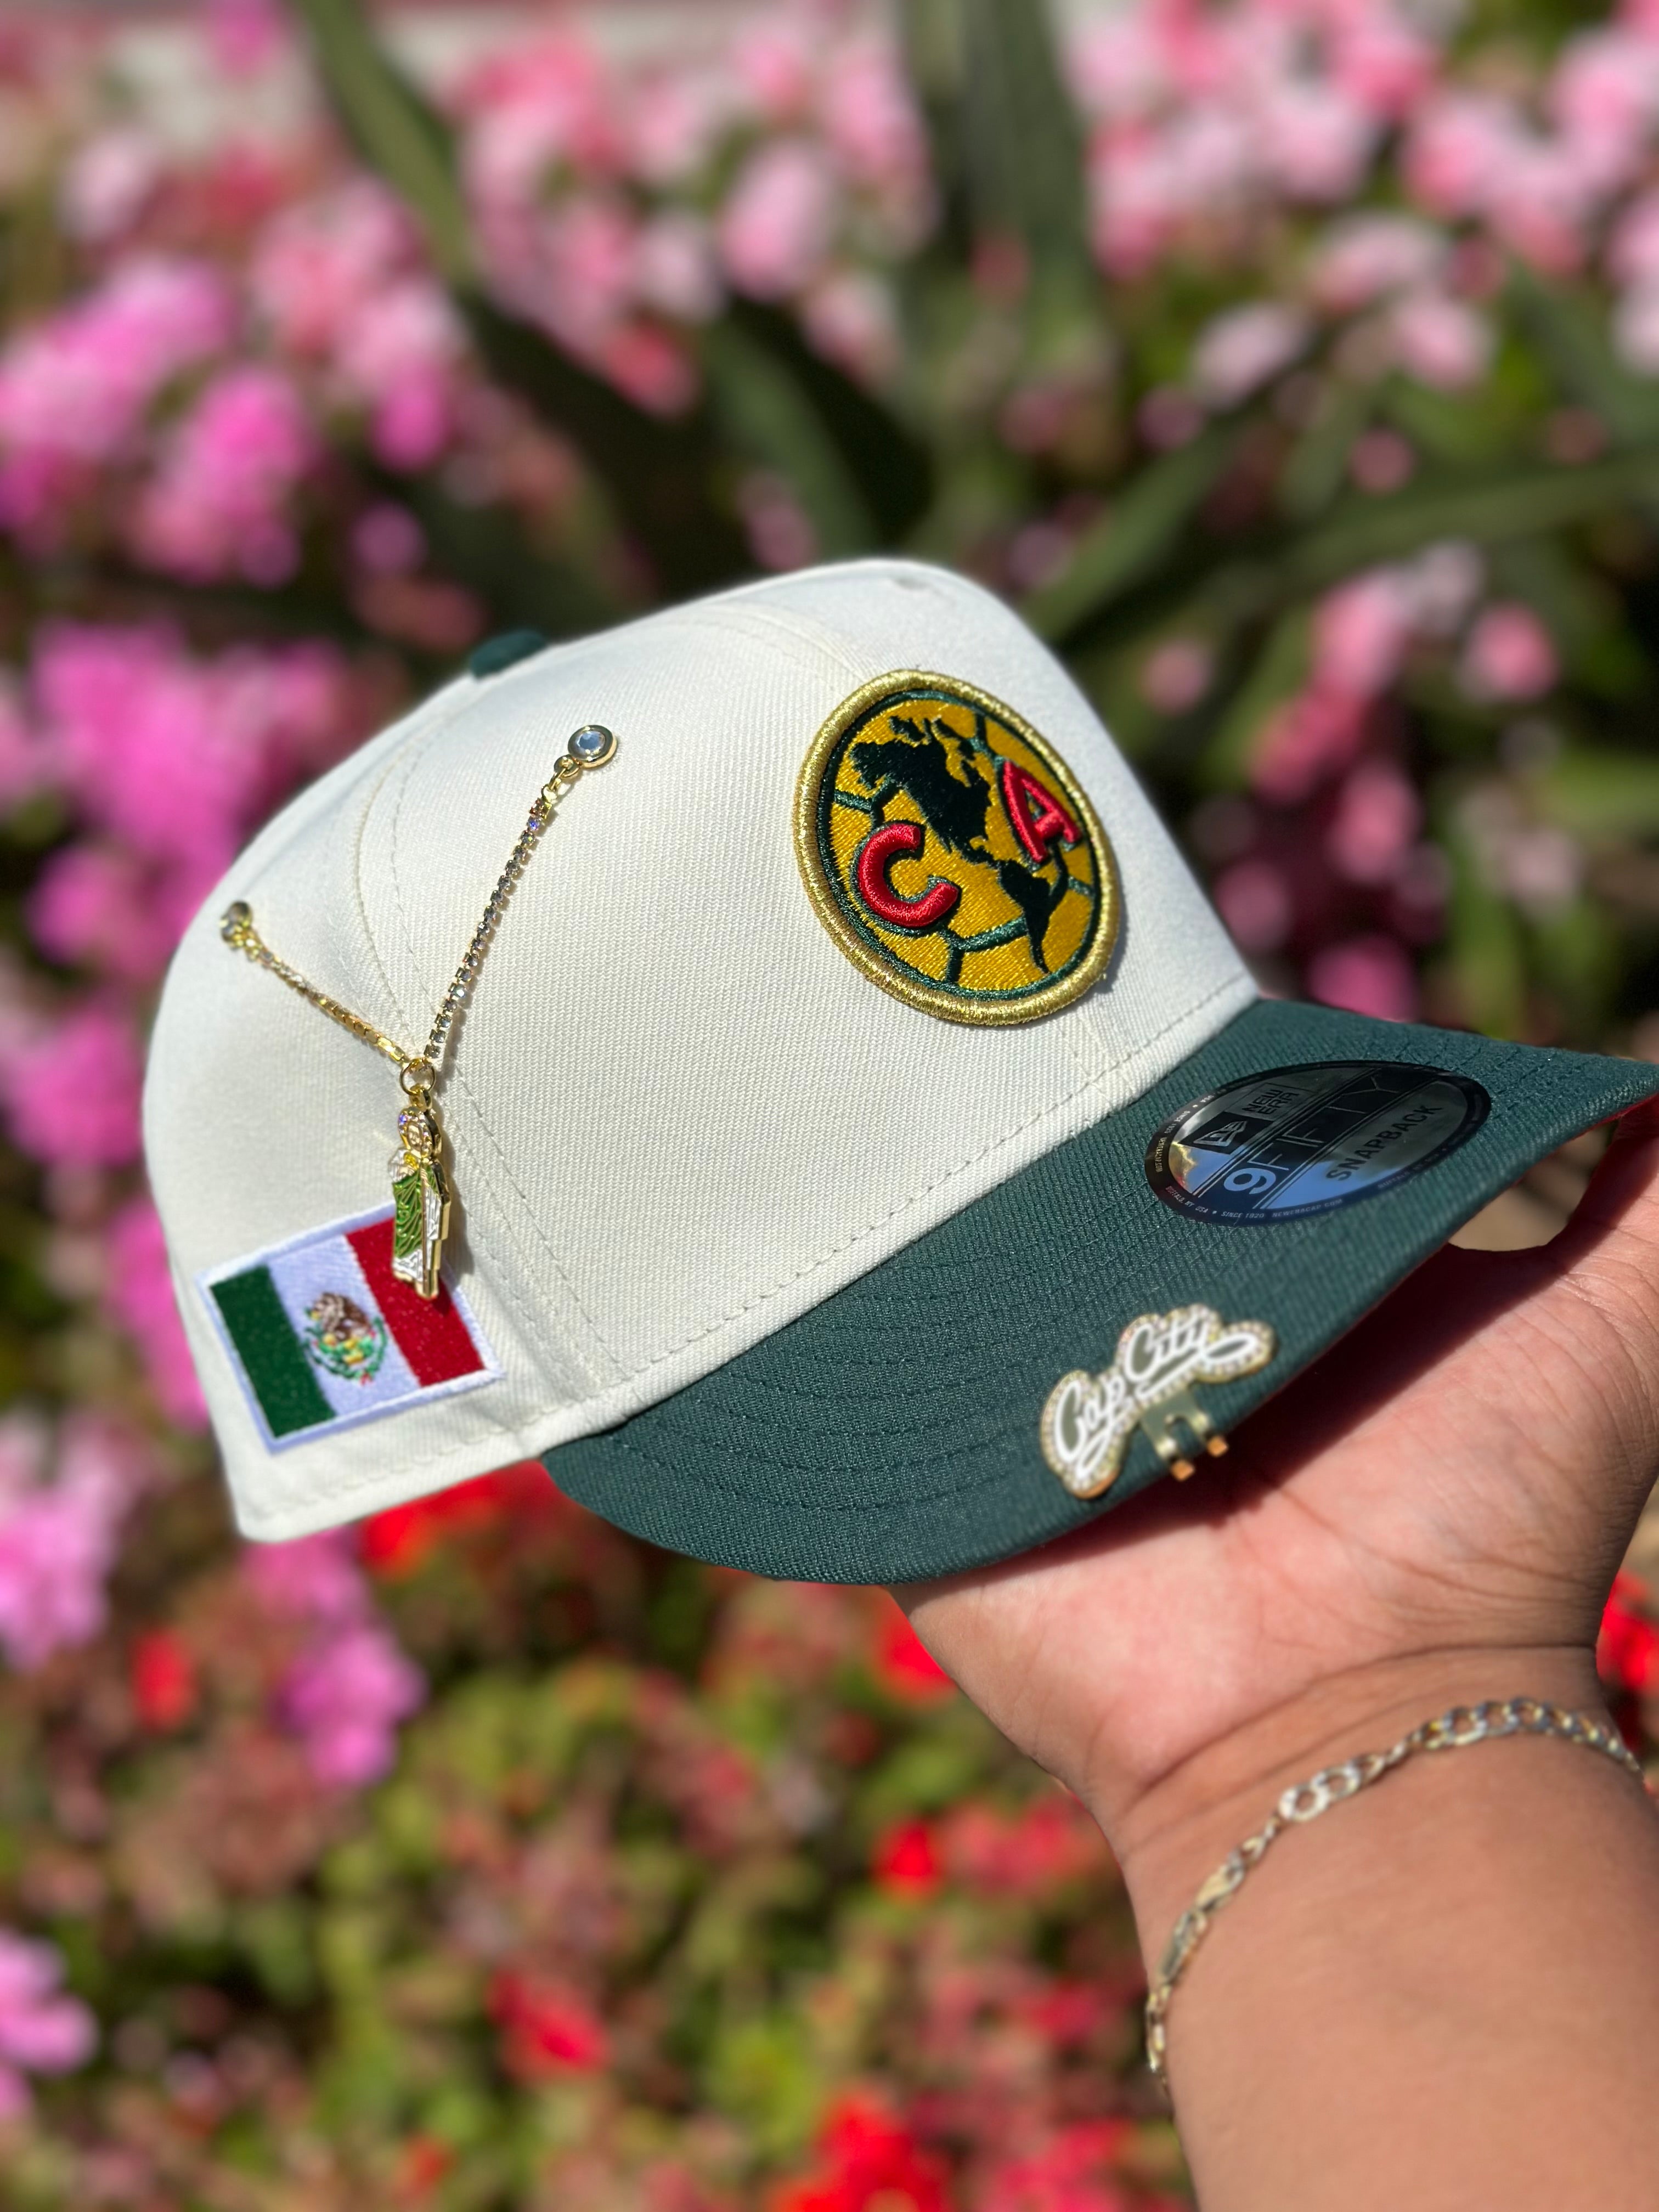 NEW ERA EXCLUSIVE 9FIFTY CHROME WHITE/GREEN "CLUB AMERICA" SNAPBACK W/MEXICO FLAG SIDE PATCH